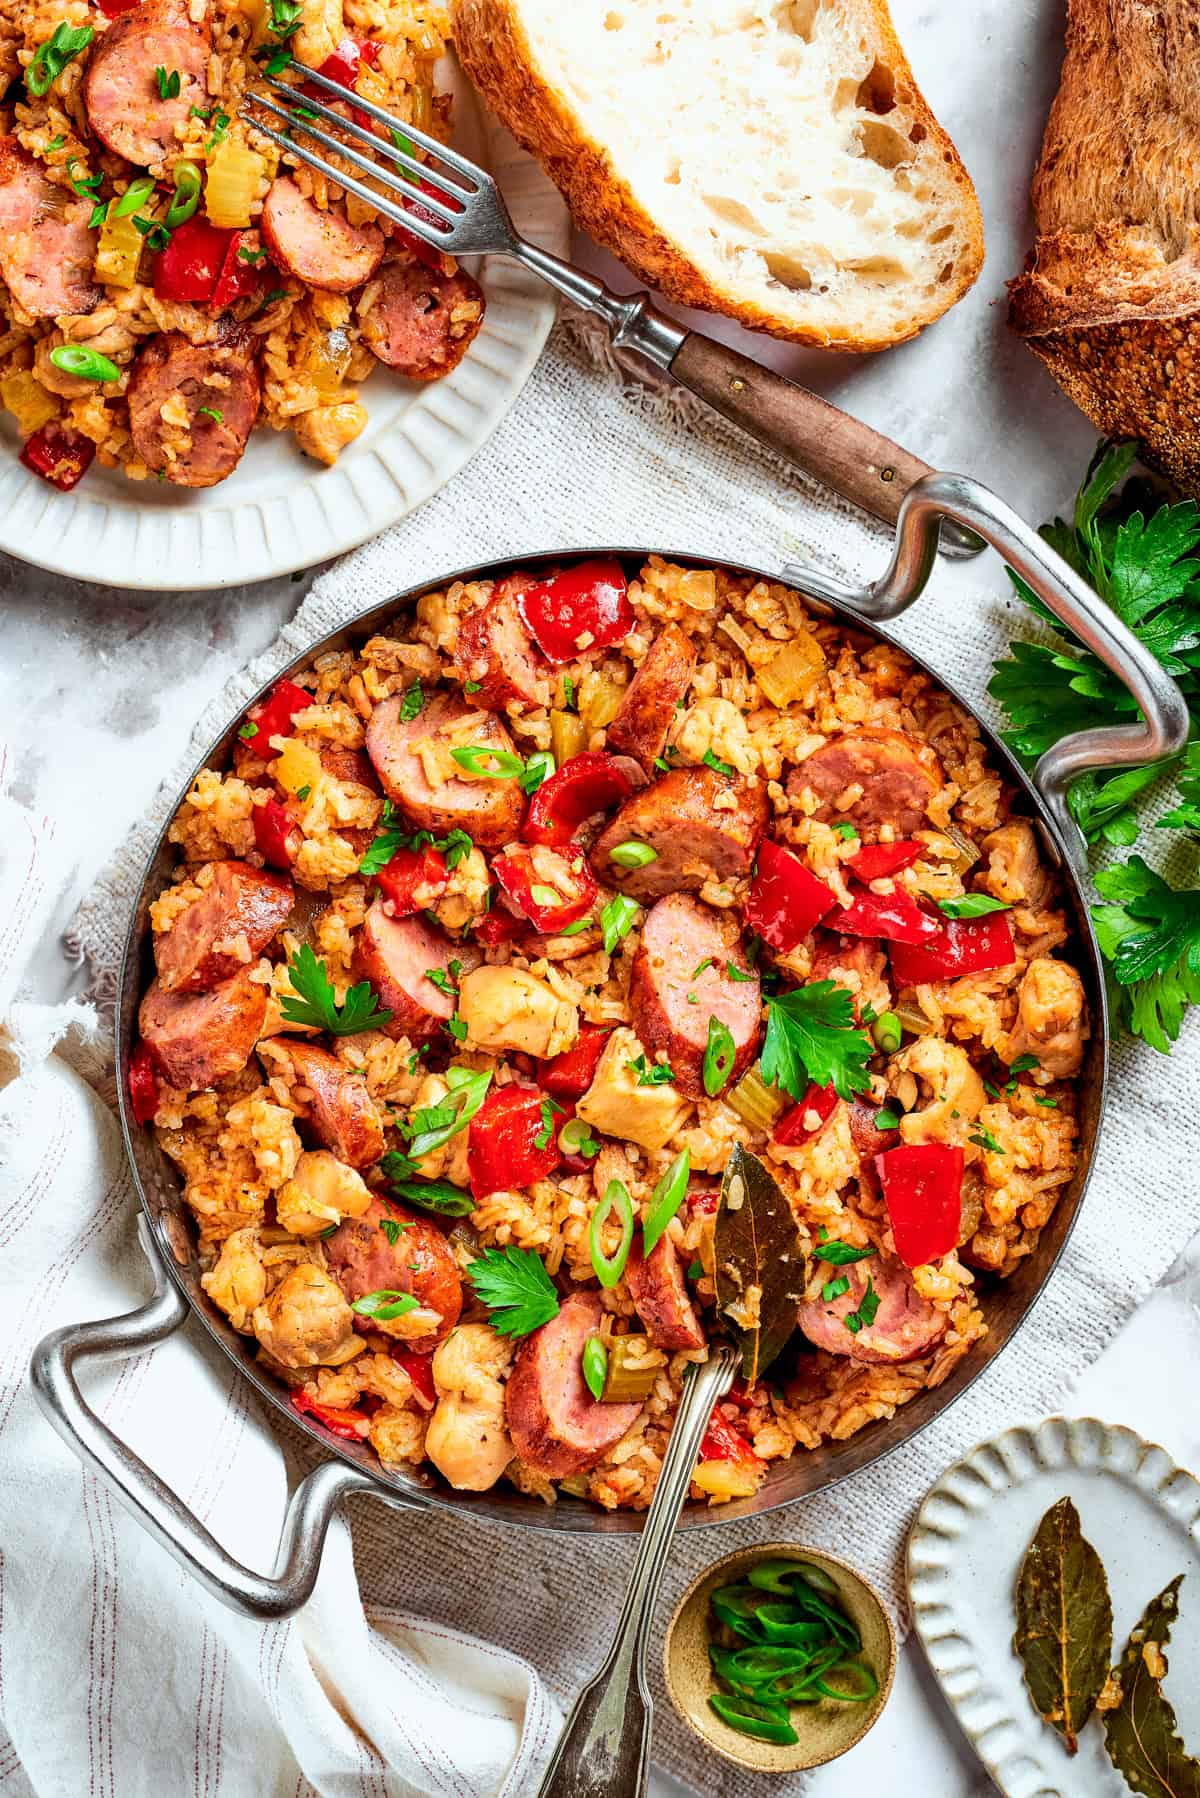 A big pan of chicken and sausage jambalaya on a table with bread.